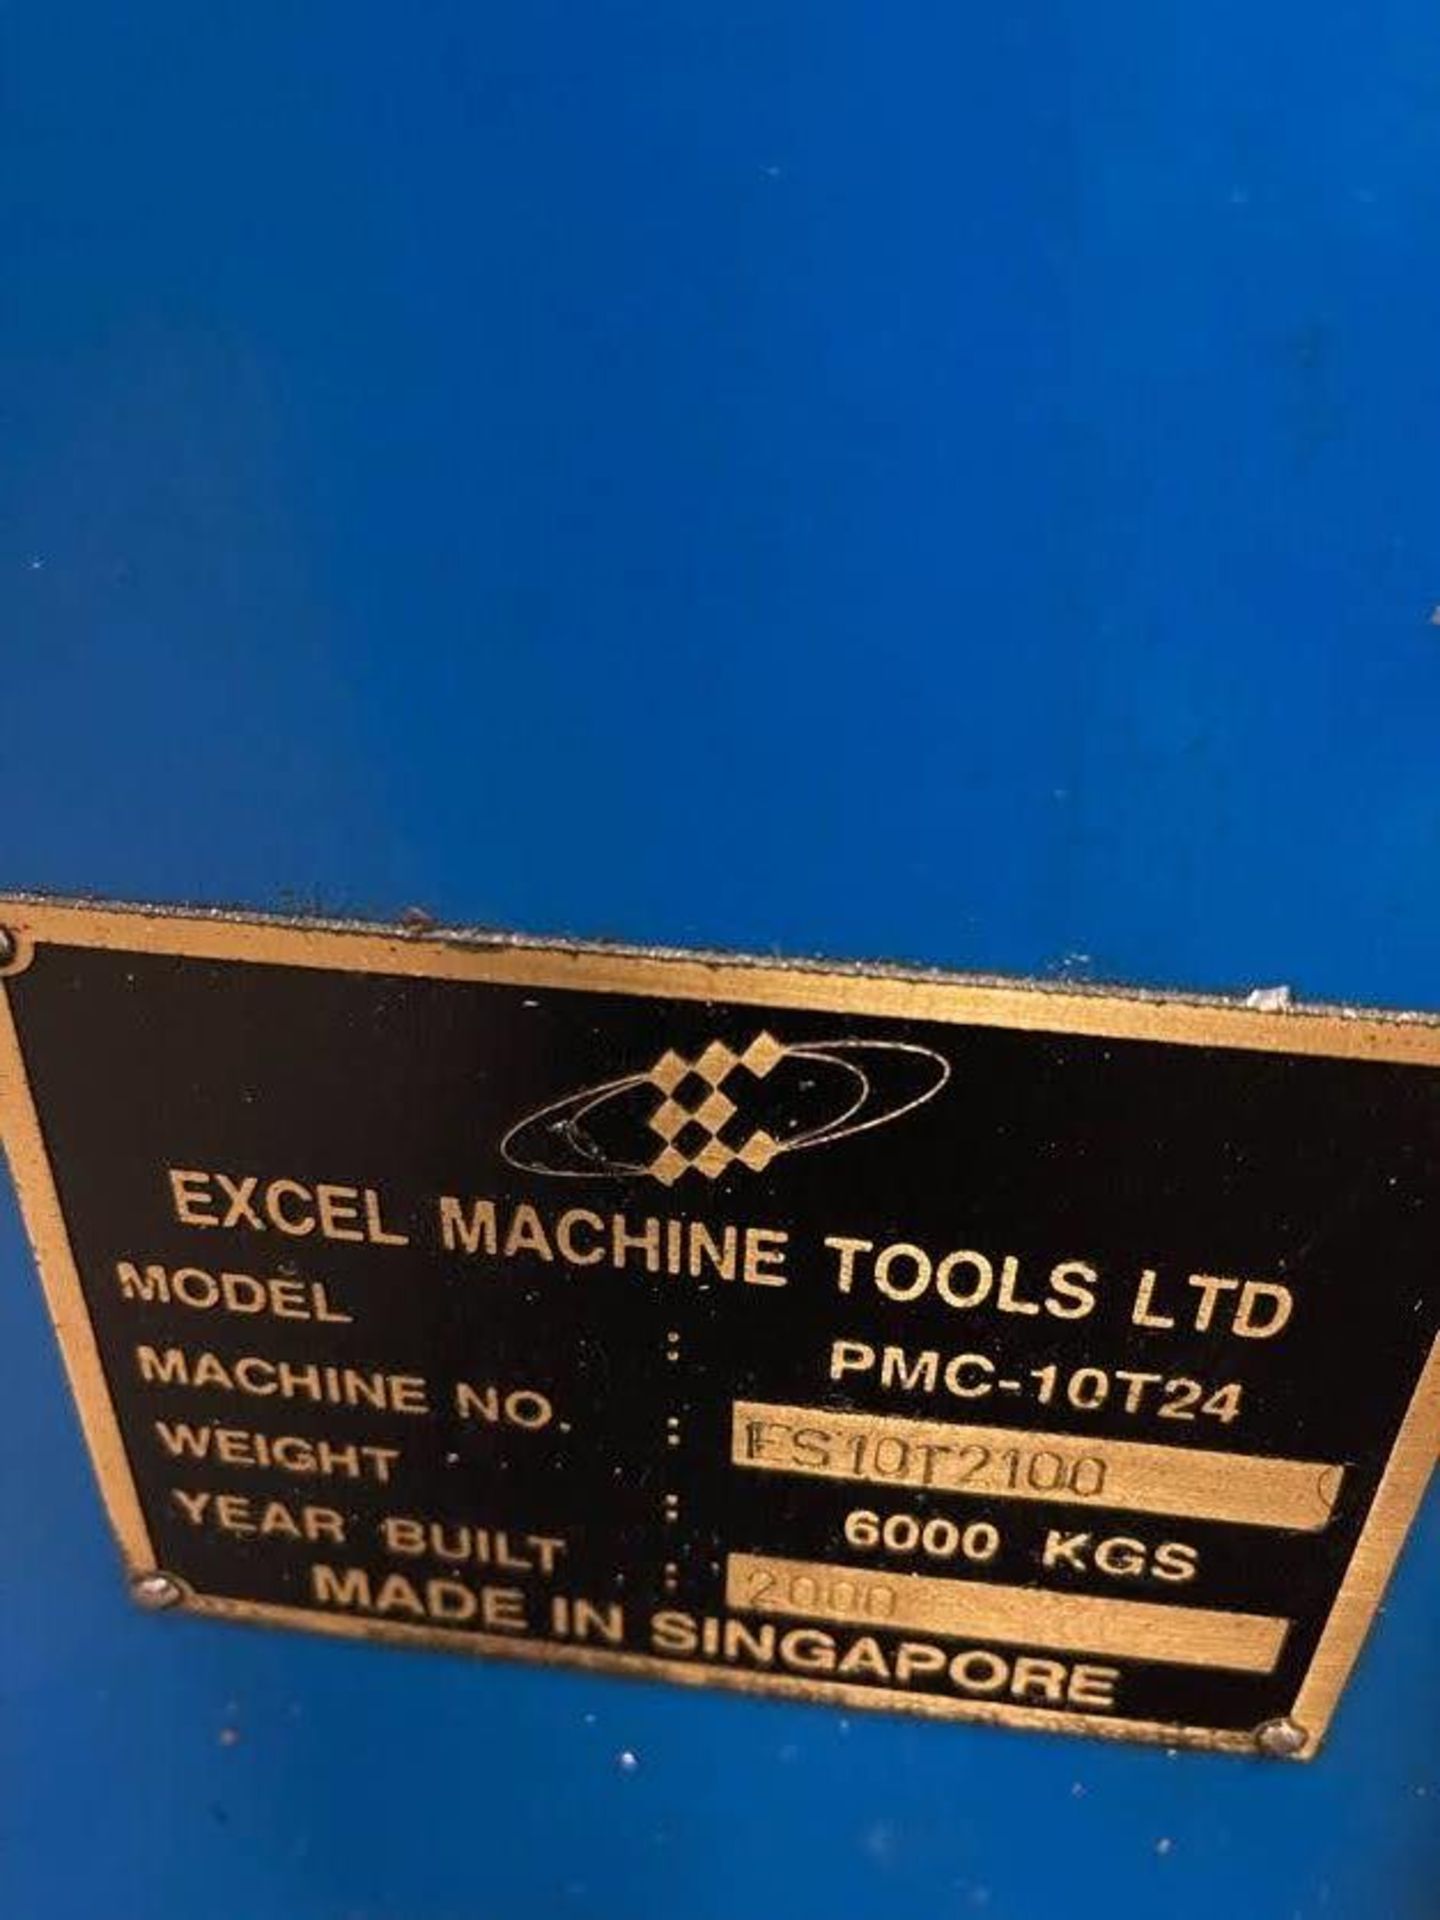 Excel PMC-10T24 CNC Vertical Machining Center, S/N ES10T2130, 2000 - Image 4 of 12